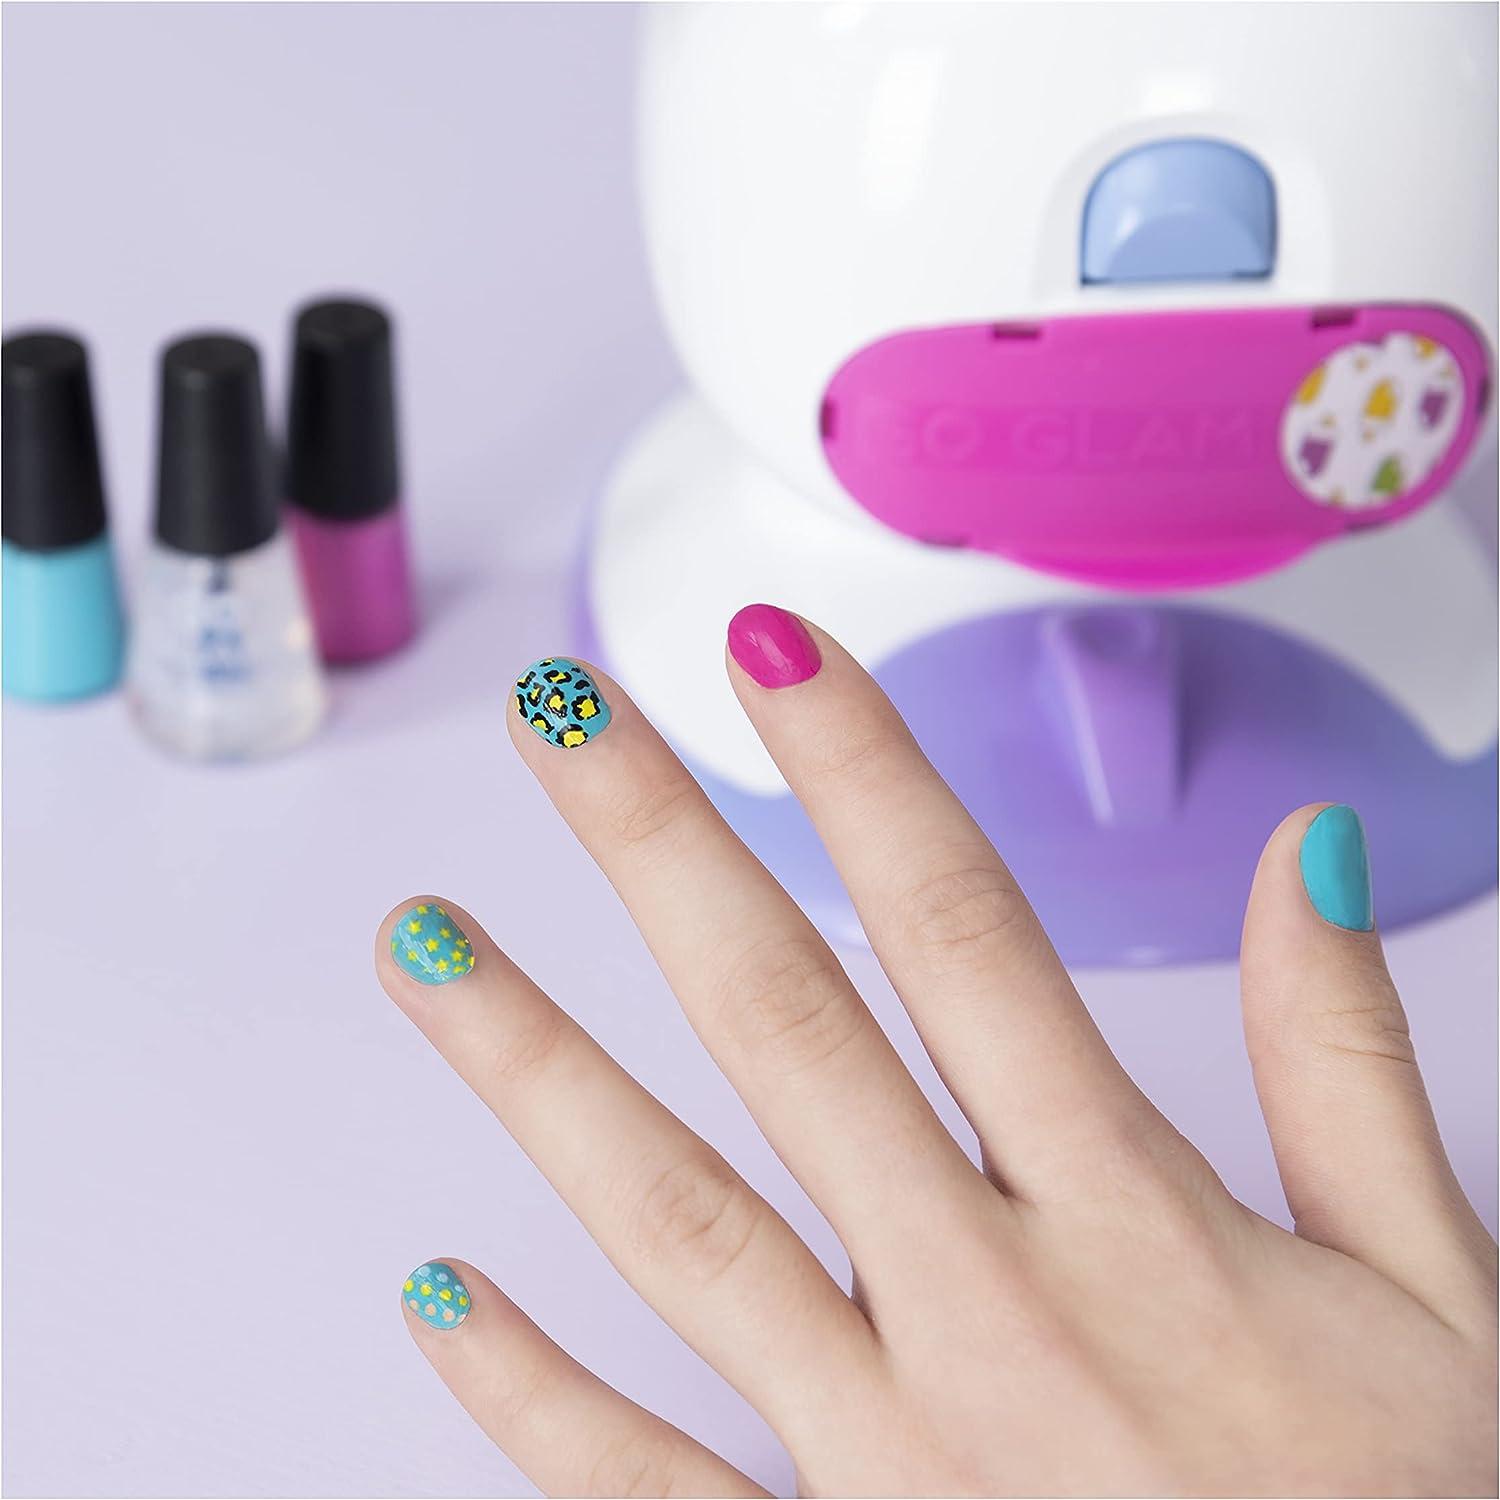 COOL MAKER GO GLAM NAIL STAMPER - The Toy Insider